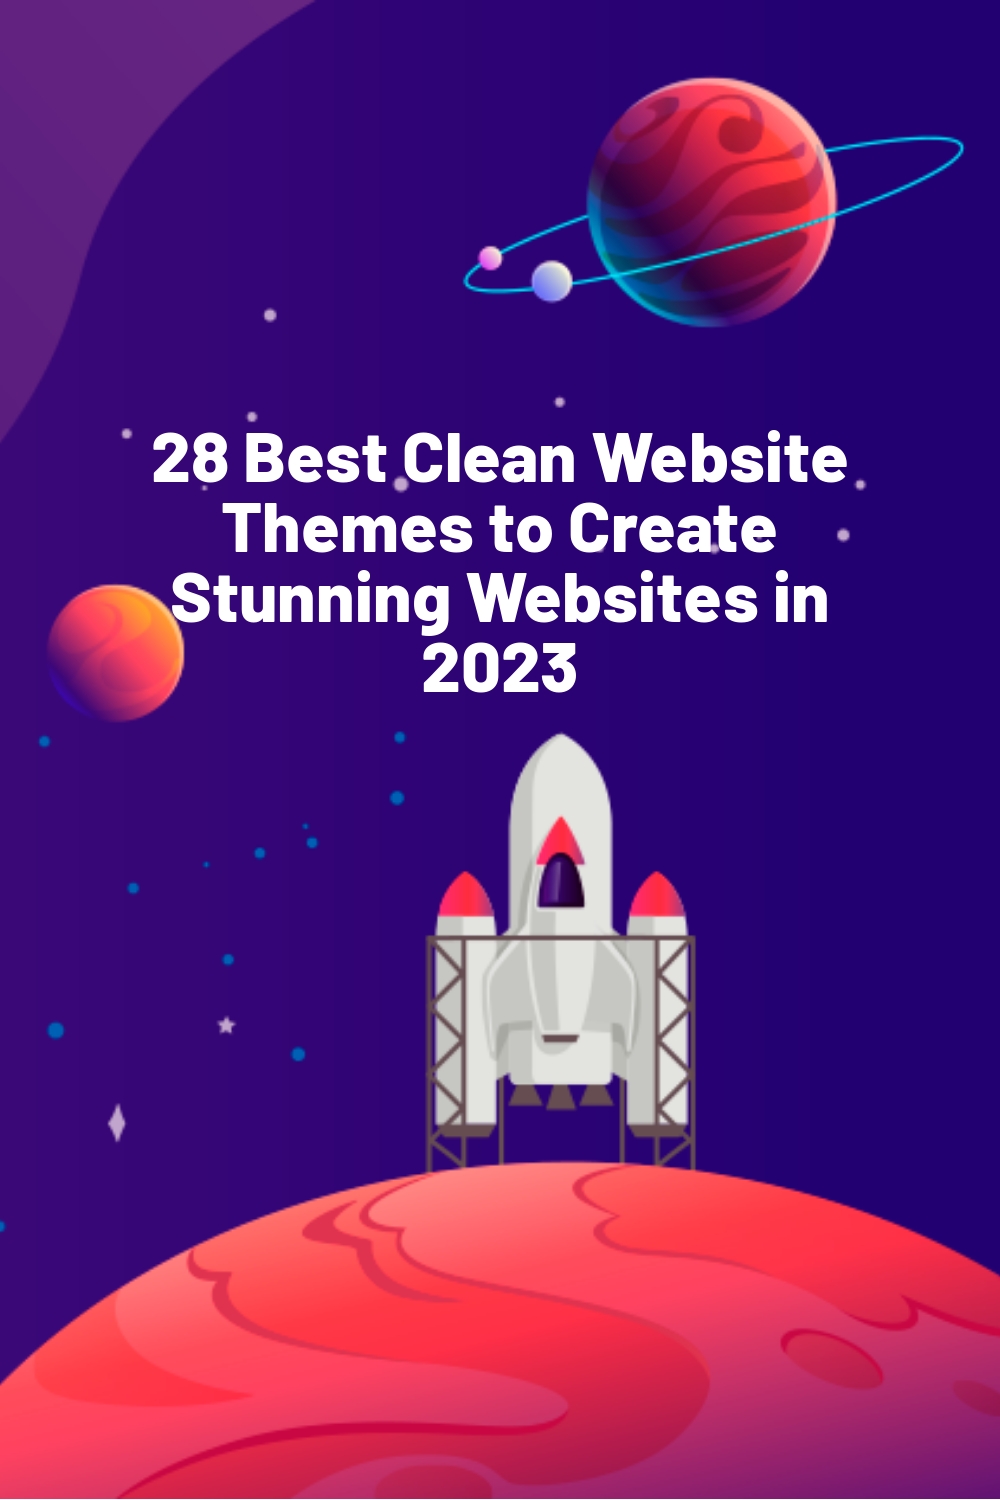 28 Best Clean Website Themes to Create Stunning Websites in 2023